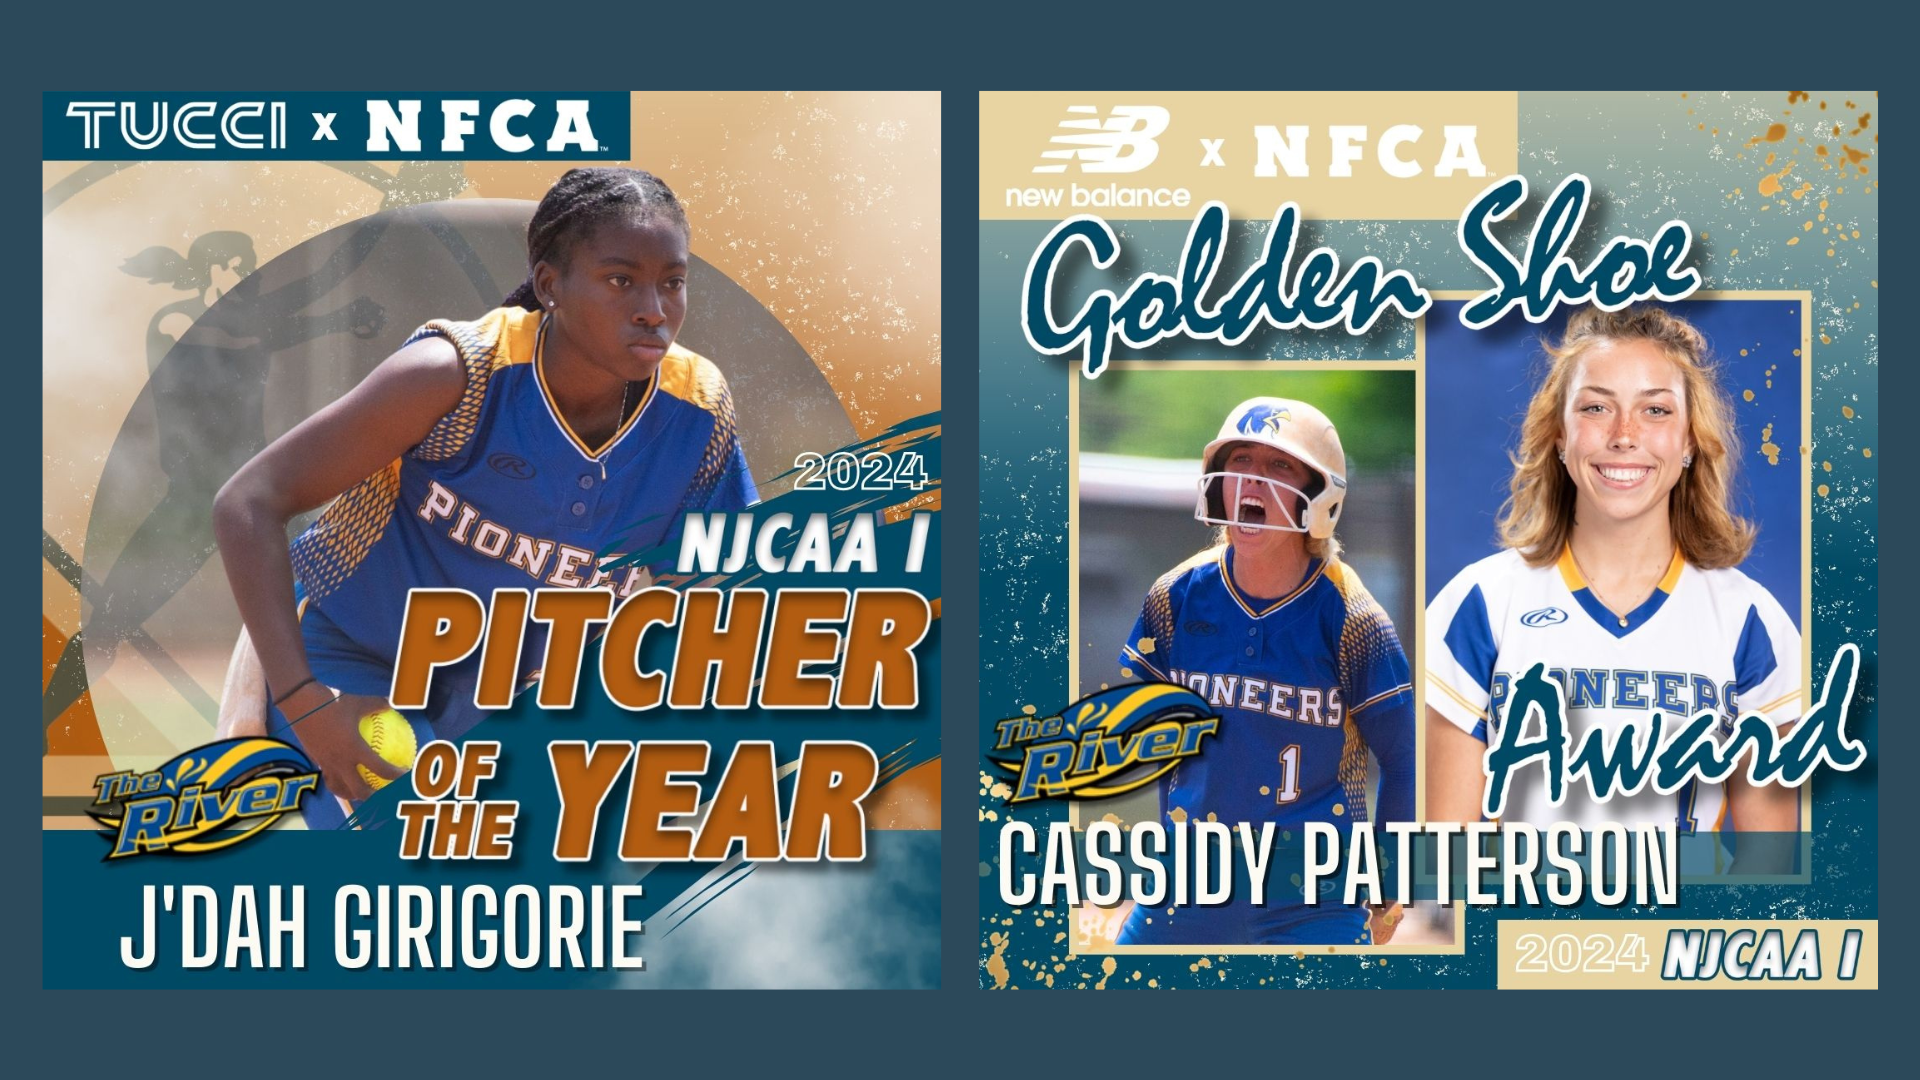 Indian River State College Softball players J’dah Girigorie and Cassidy Patterson selected for NFCA / NJCAA DI Major Awards